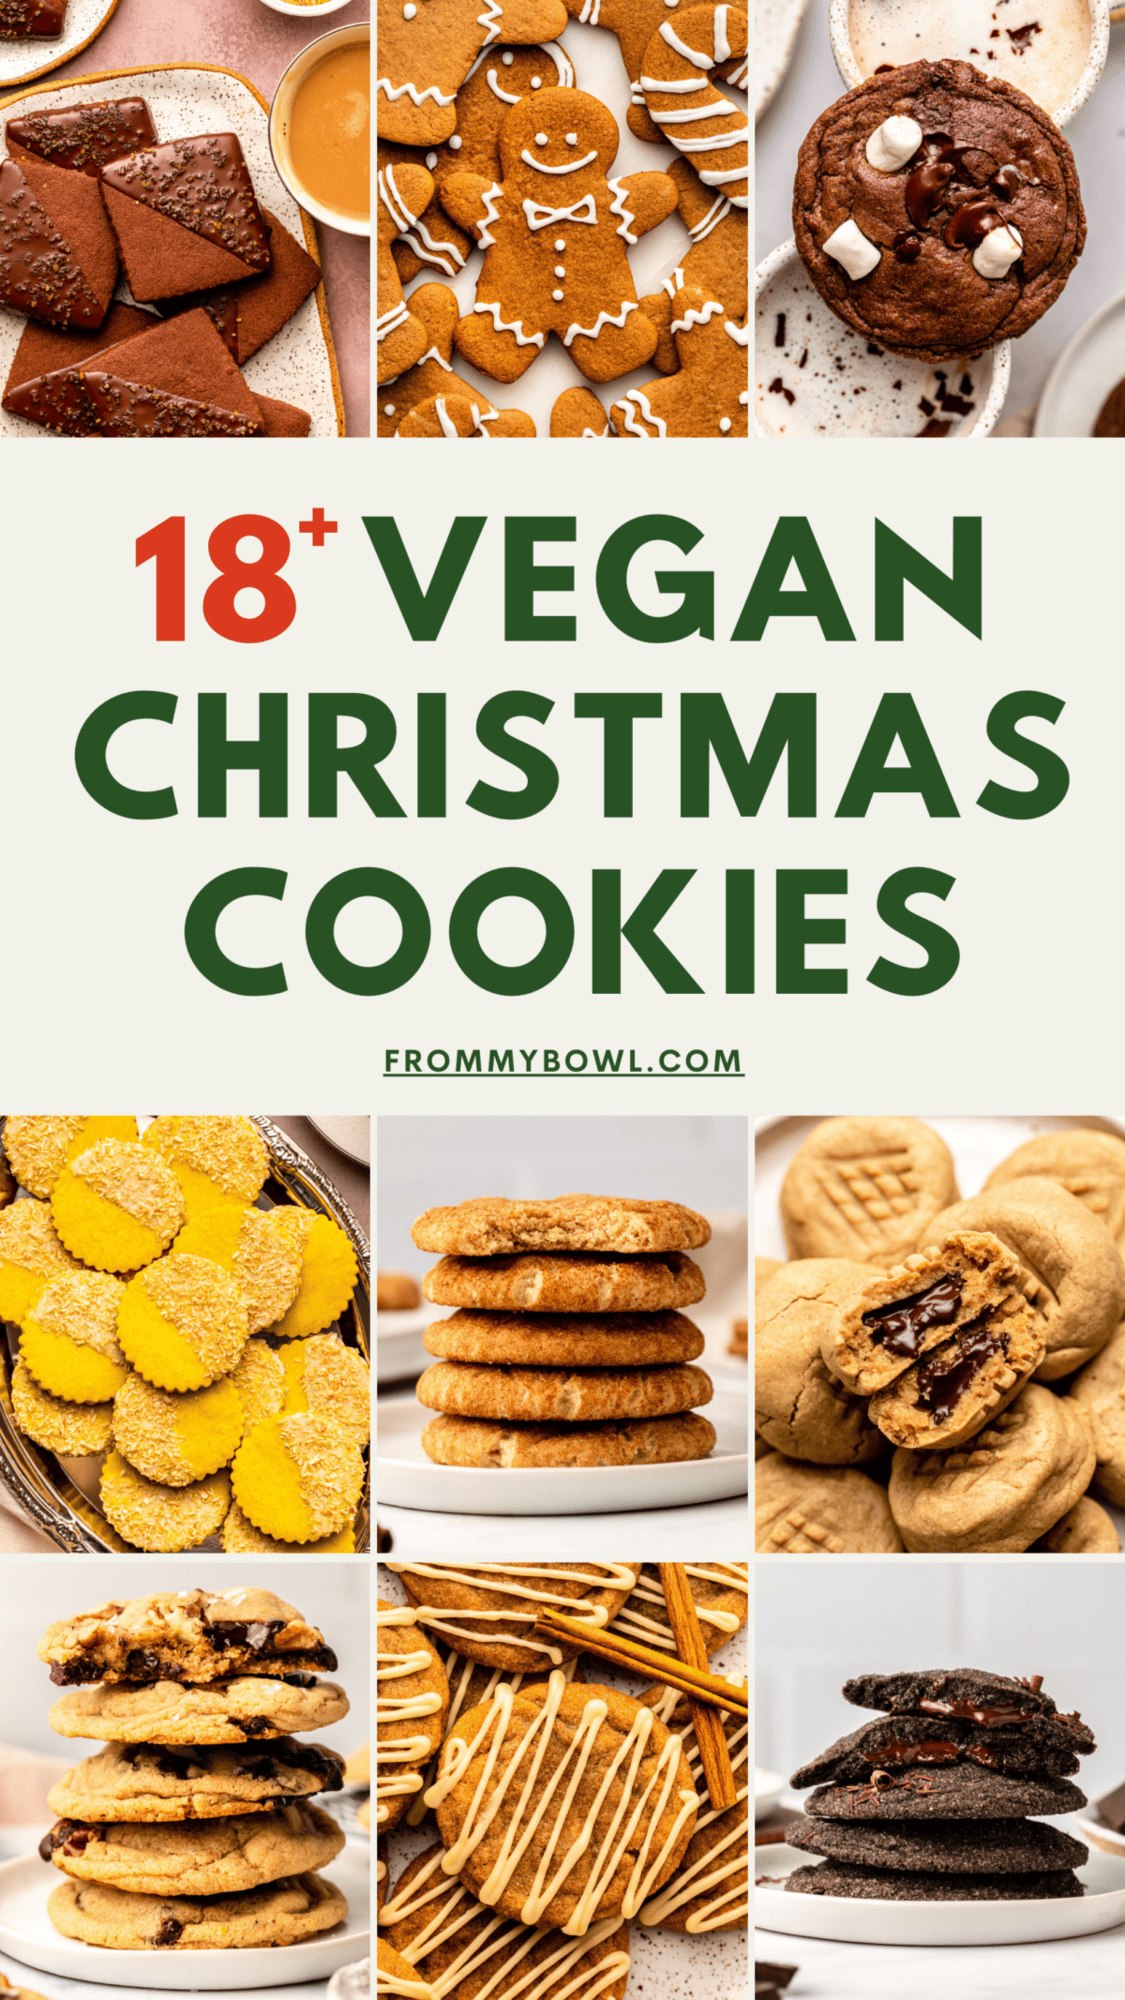 Collage of different cookie photos with text saying "18 Vegan Christmas Cookies"